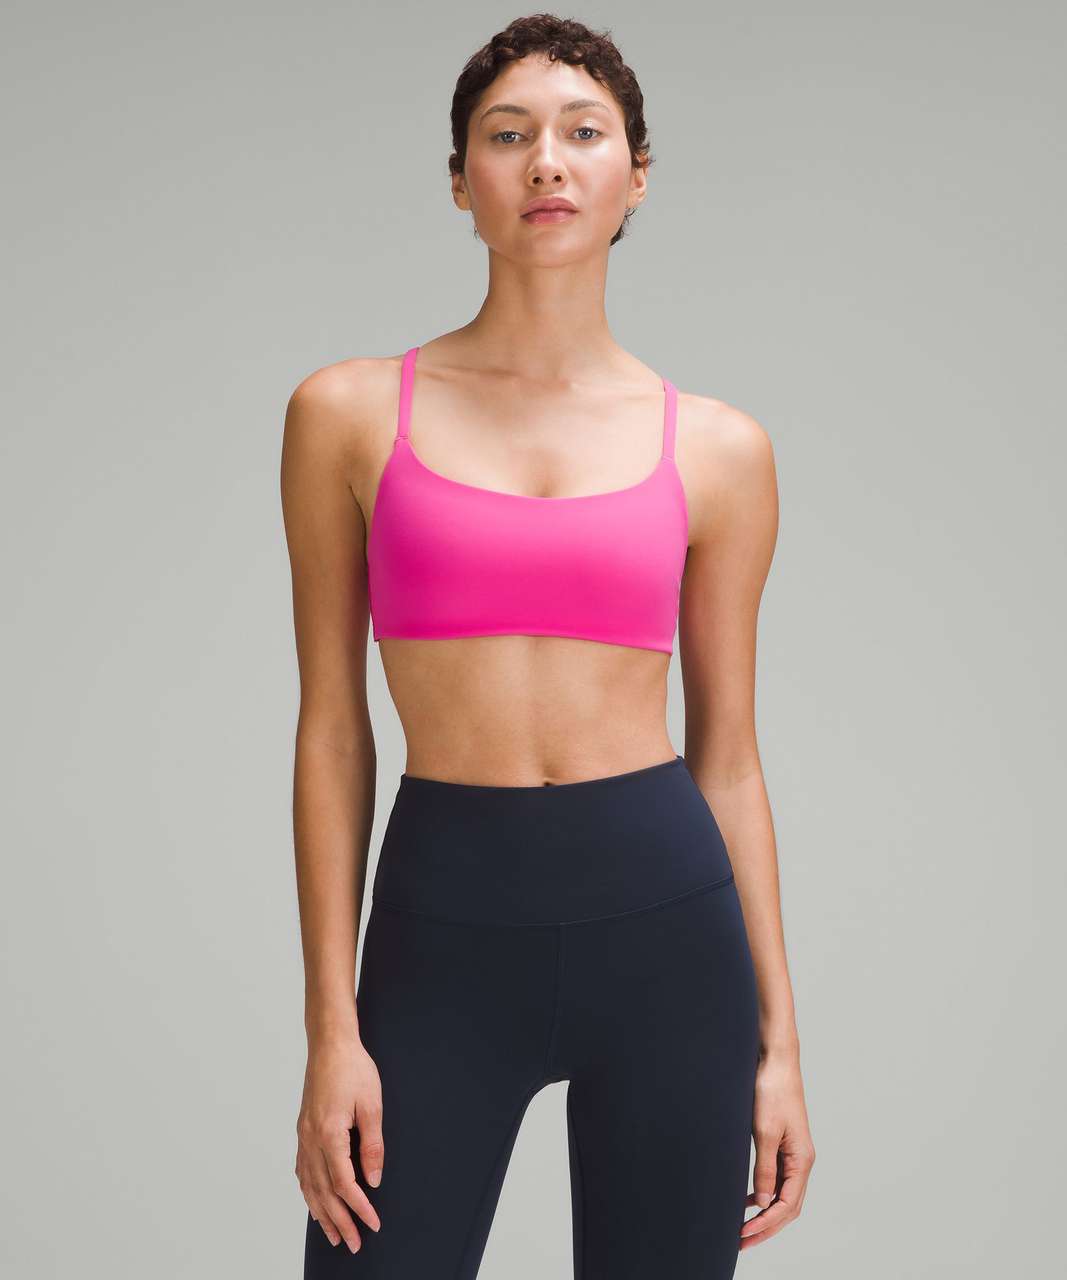 Lululemon Wunder Train Strappy Racer Bra *Light Support, A/B Cup - Sonic Pink